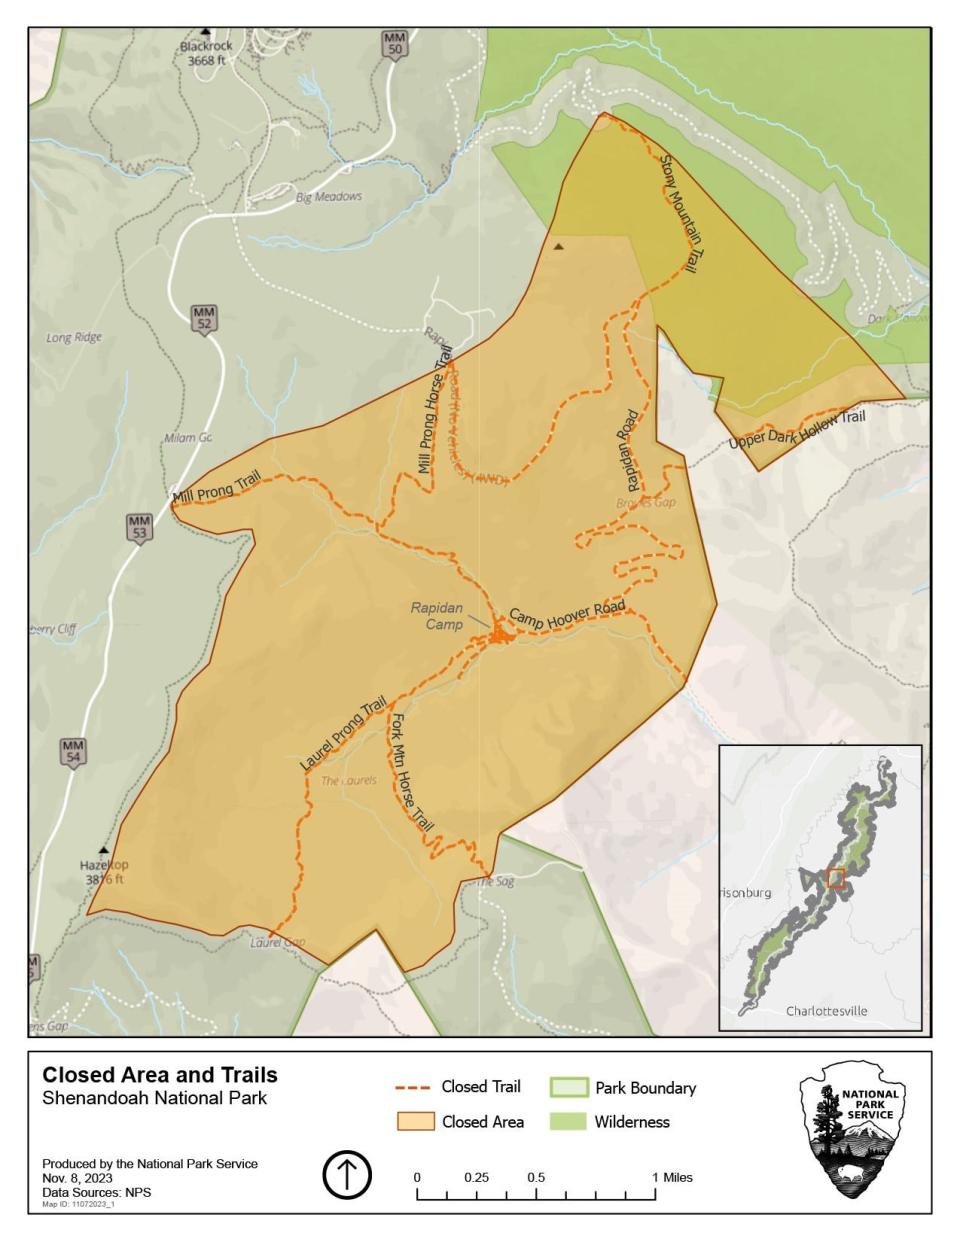 Shenandoah National Park has closed the Rapidan Camp area near the eastern boundary in the central section of the park (see map) due to a wildfire.